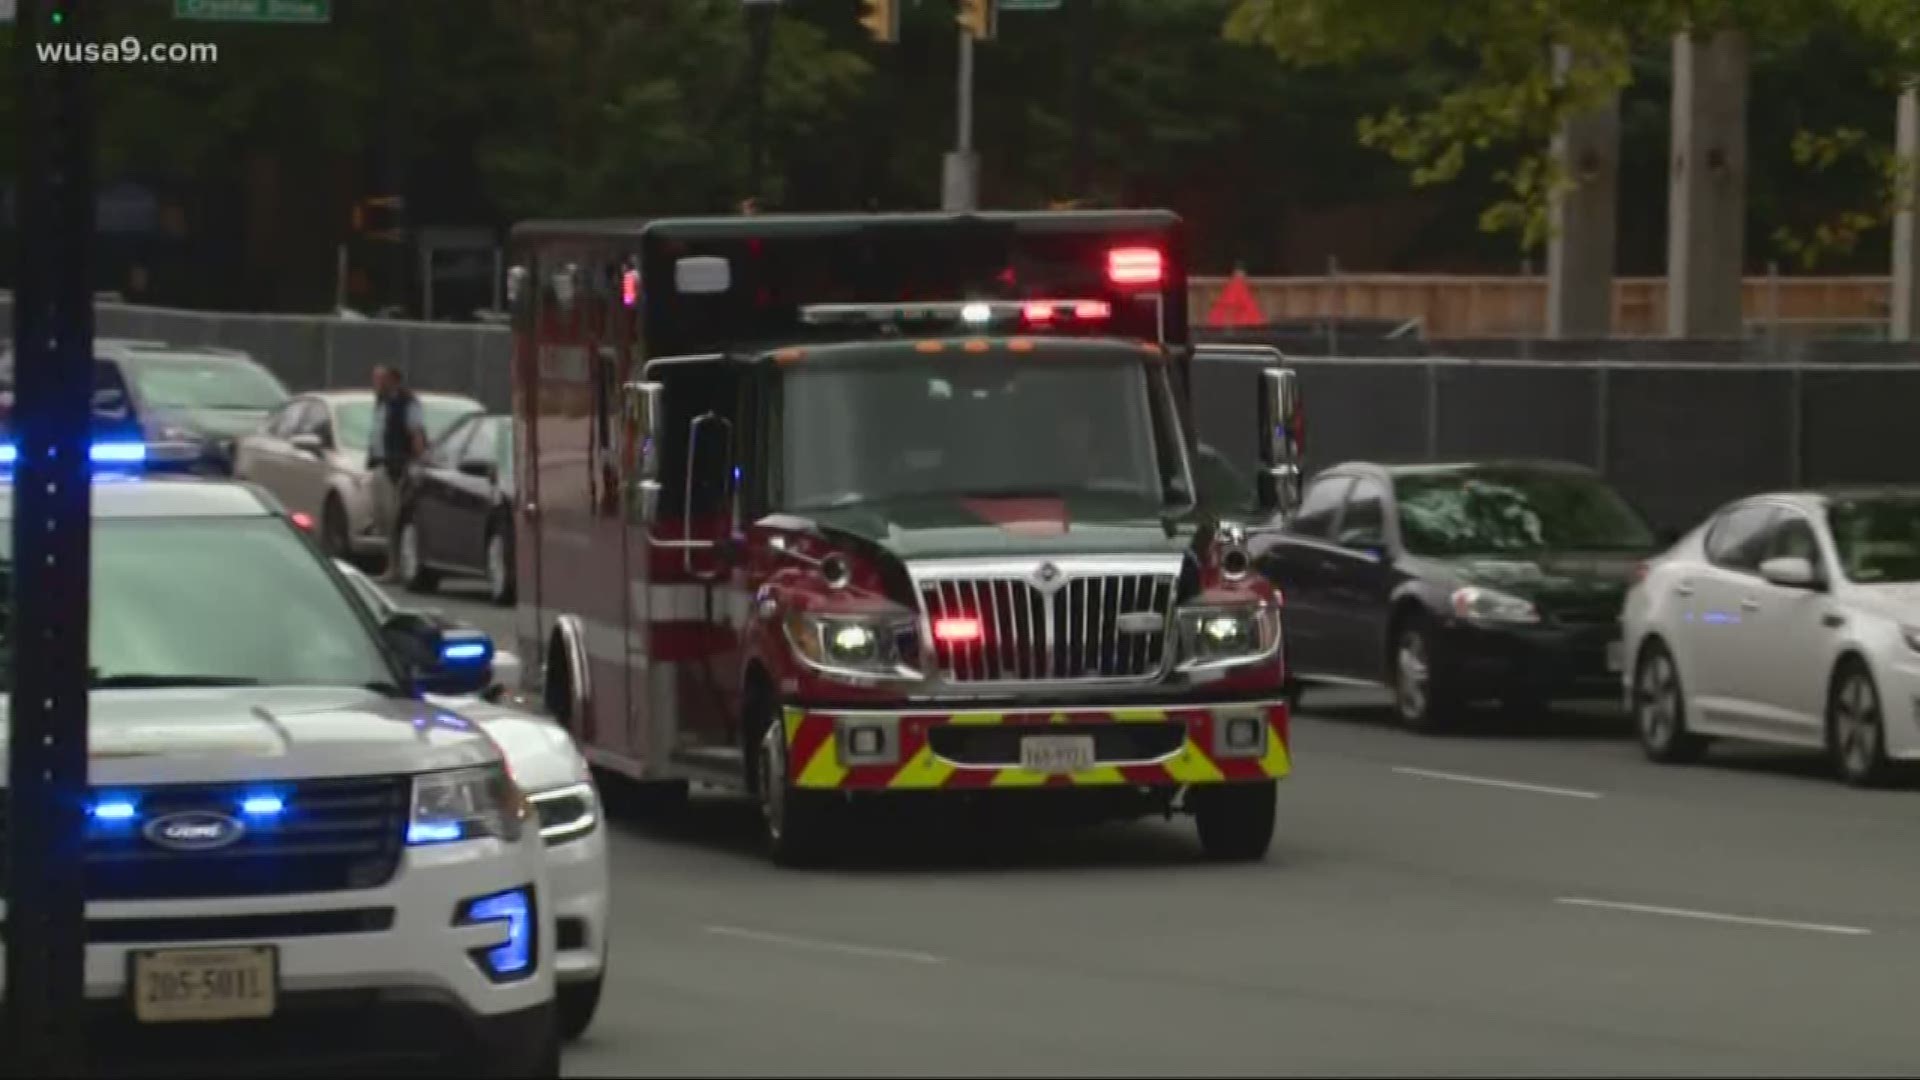 Two people were injured in a shooting in Arlington, Virginia after a man forced his way into an office suite Tuesday afternoon, police said.

The shooting happened shortly before noon in the 1500 block of Crystal Drive in Arlington at a commercial building near the Pentagon.